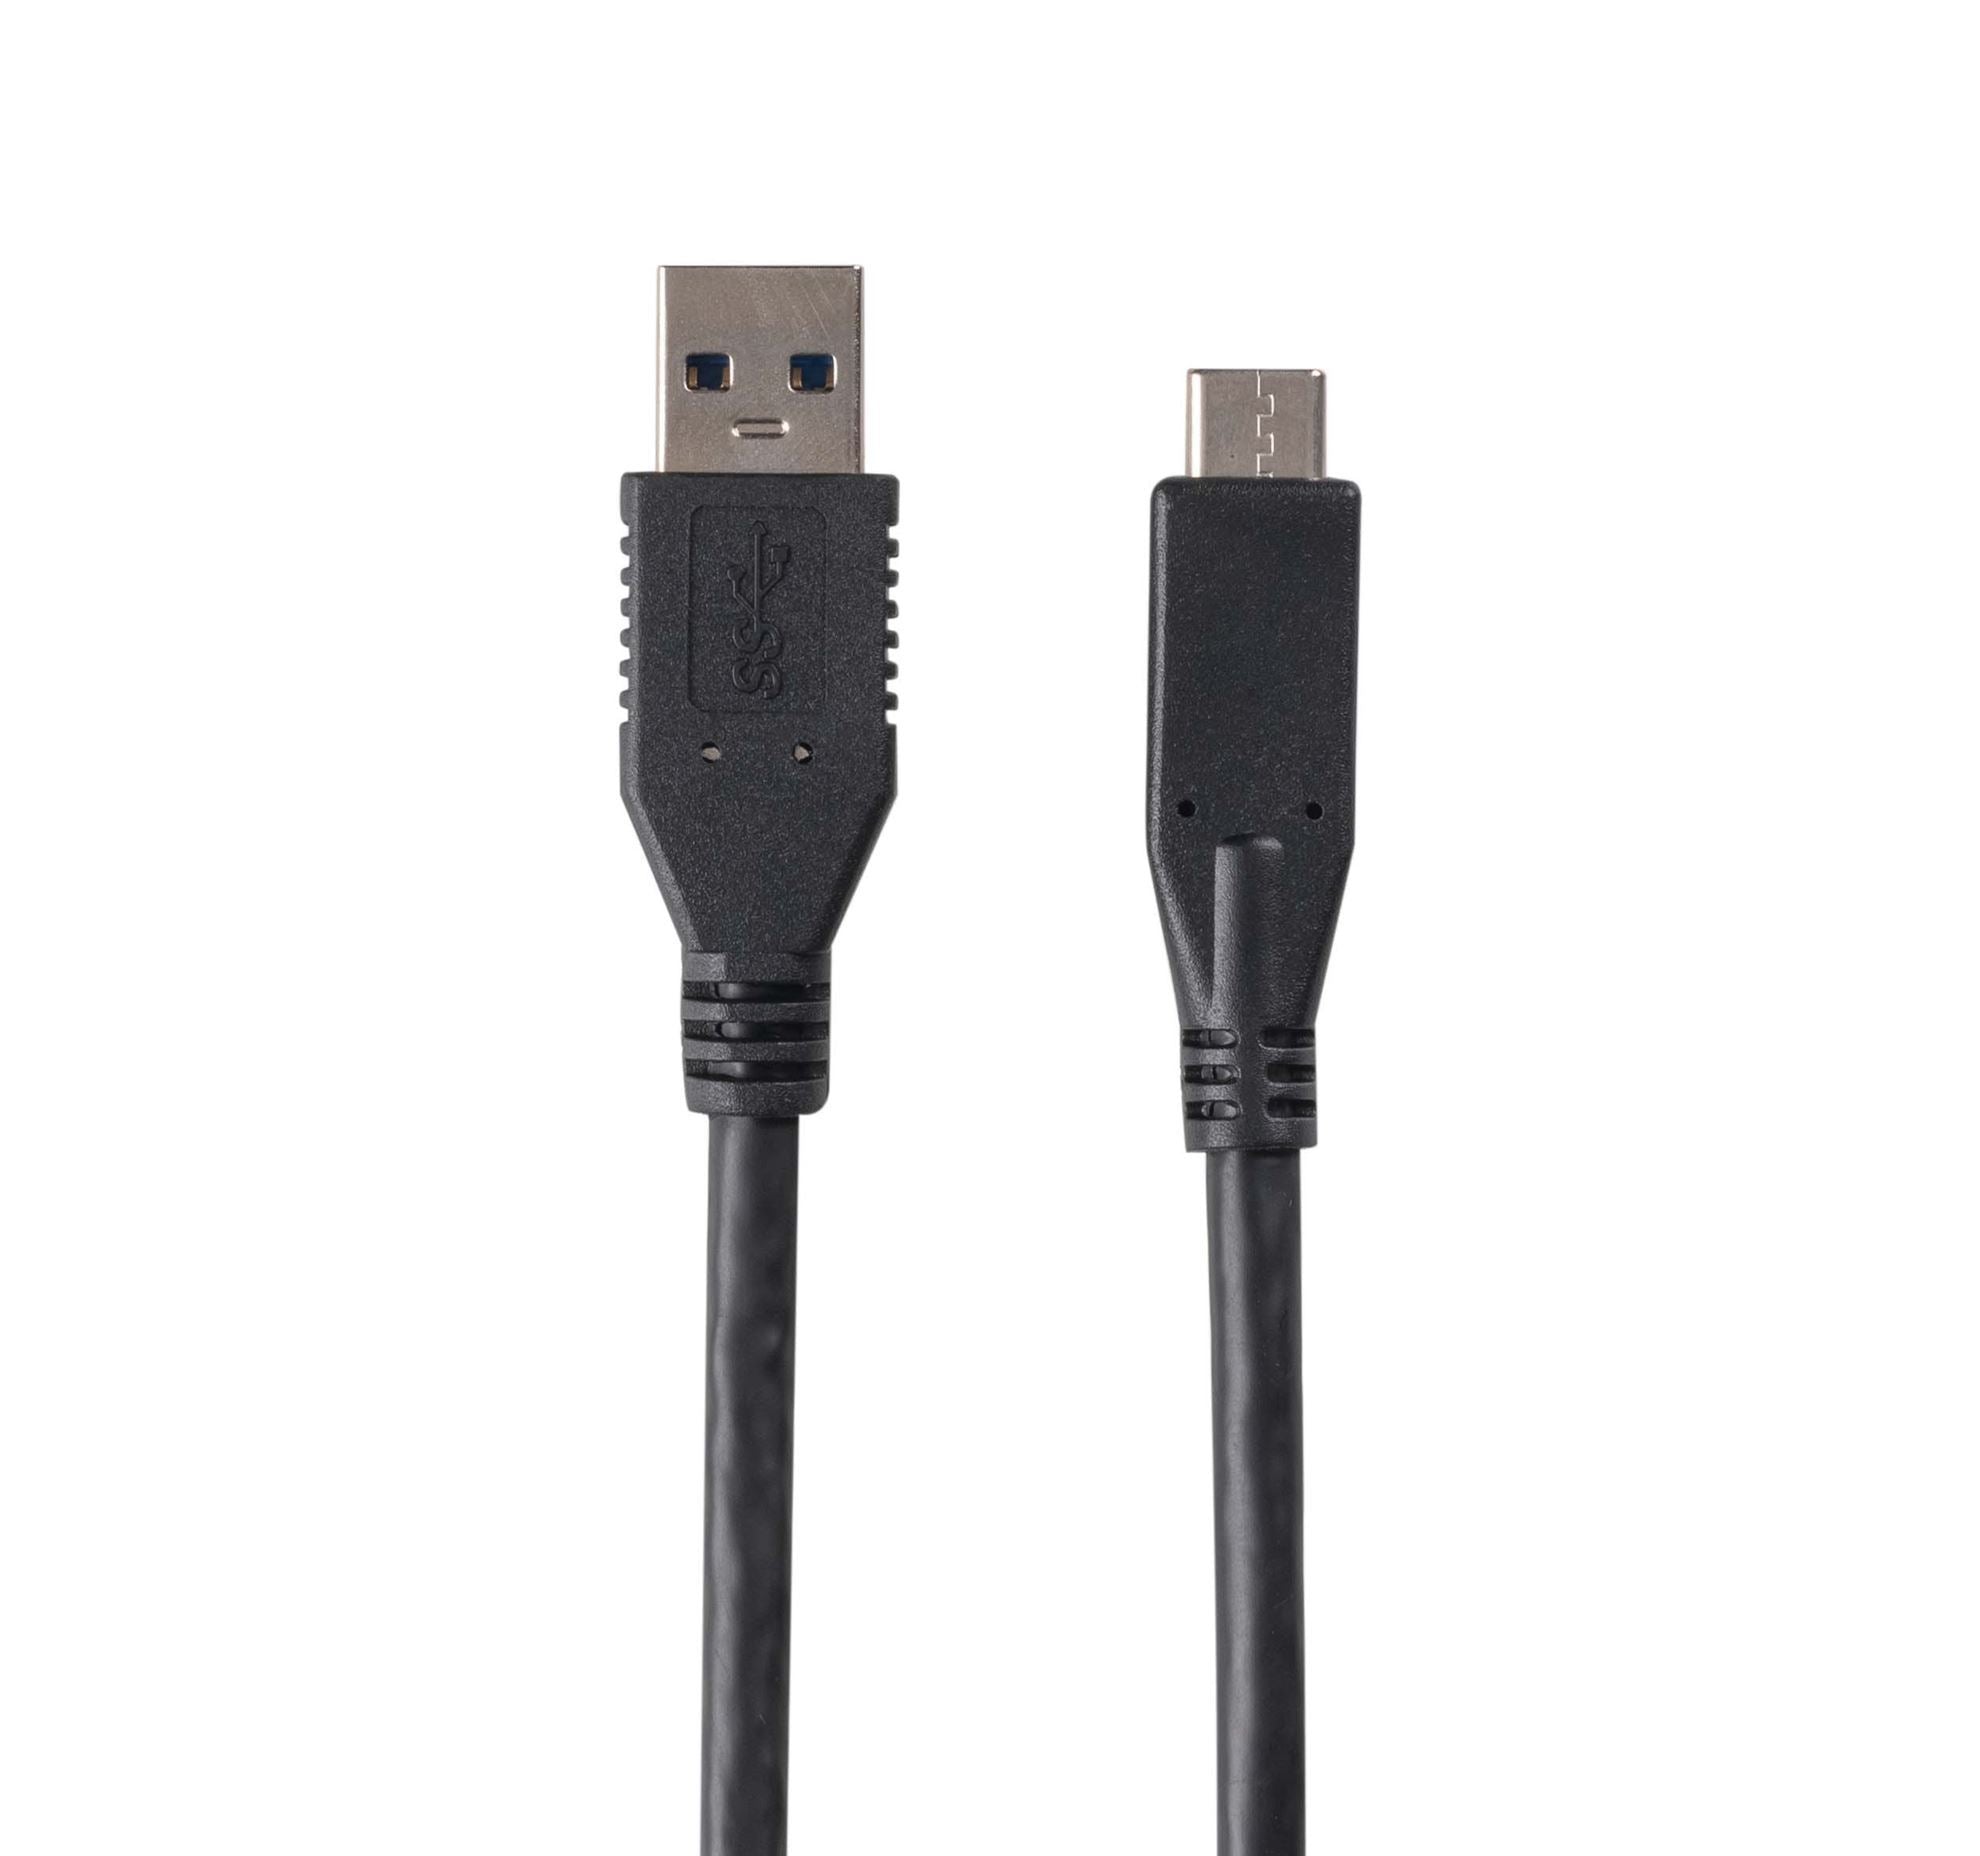 DYNAMIX_2M,_USB_3.1_USB-C_Male_to_USB-A_Male_Cable._Black_Colour._Up_to_10G_Data_Transfer_Speed,_Supports_3A_Current. 1140